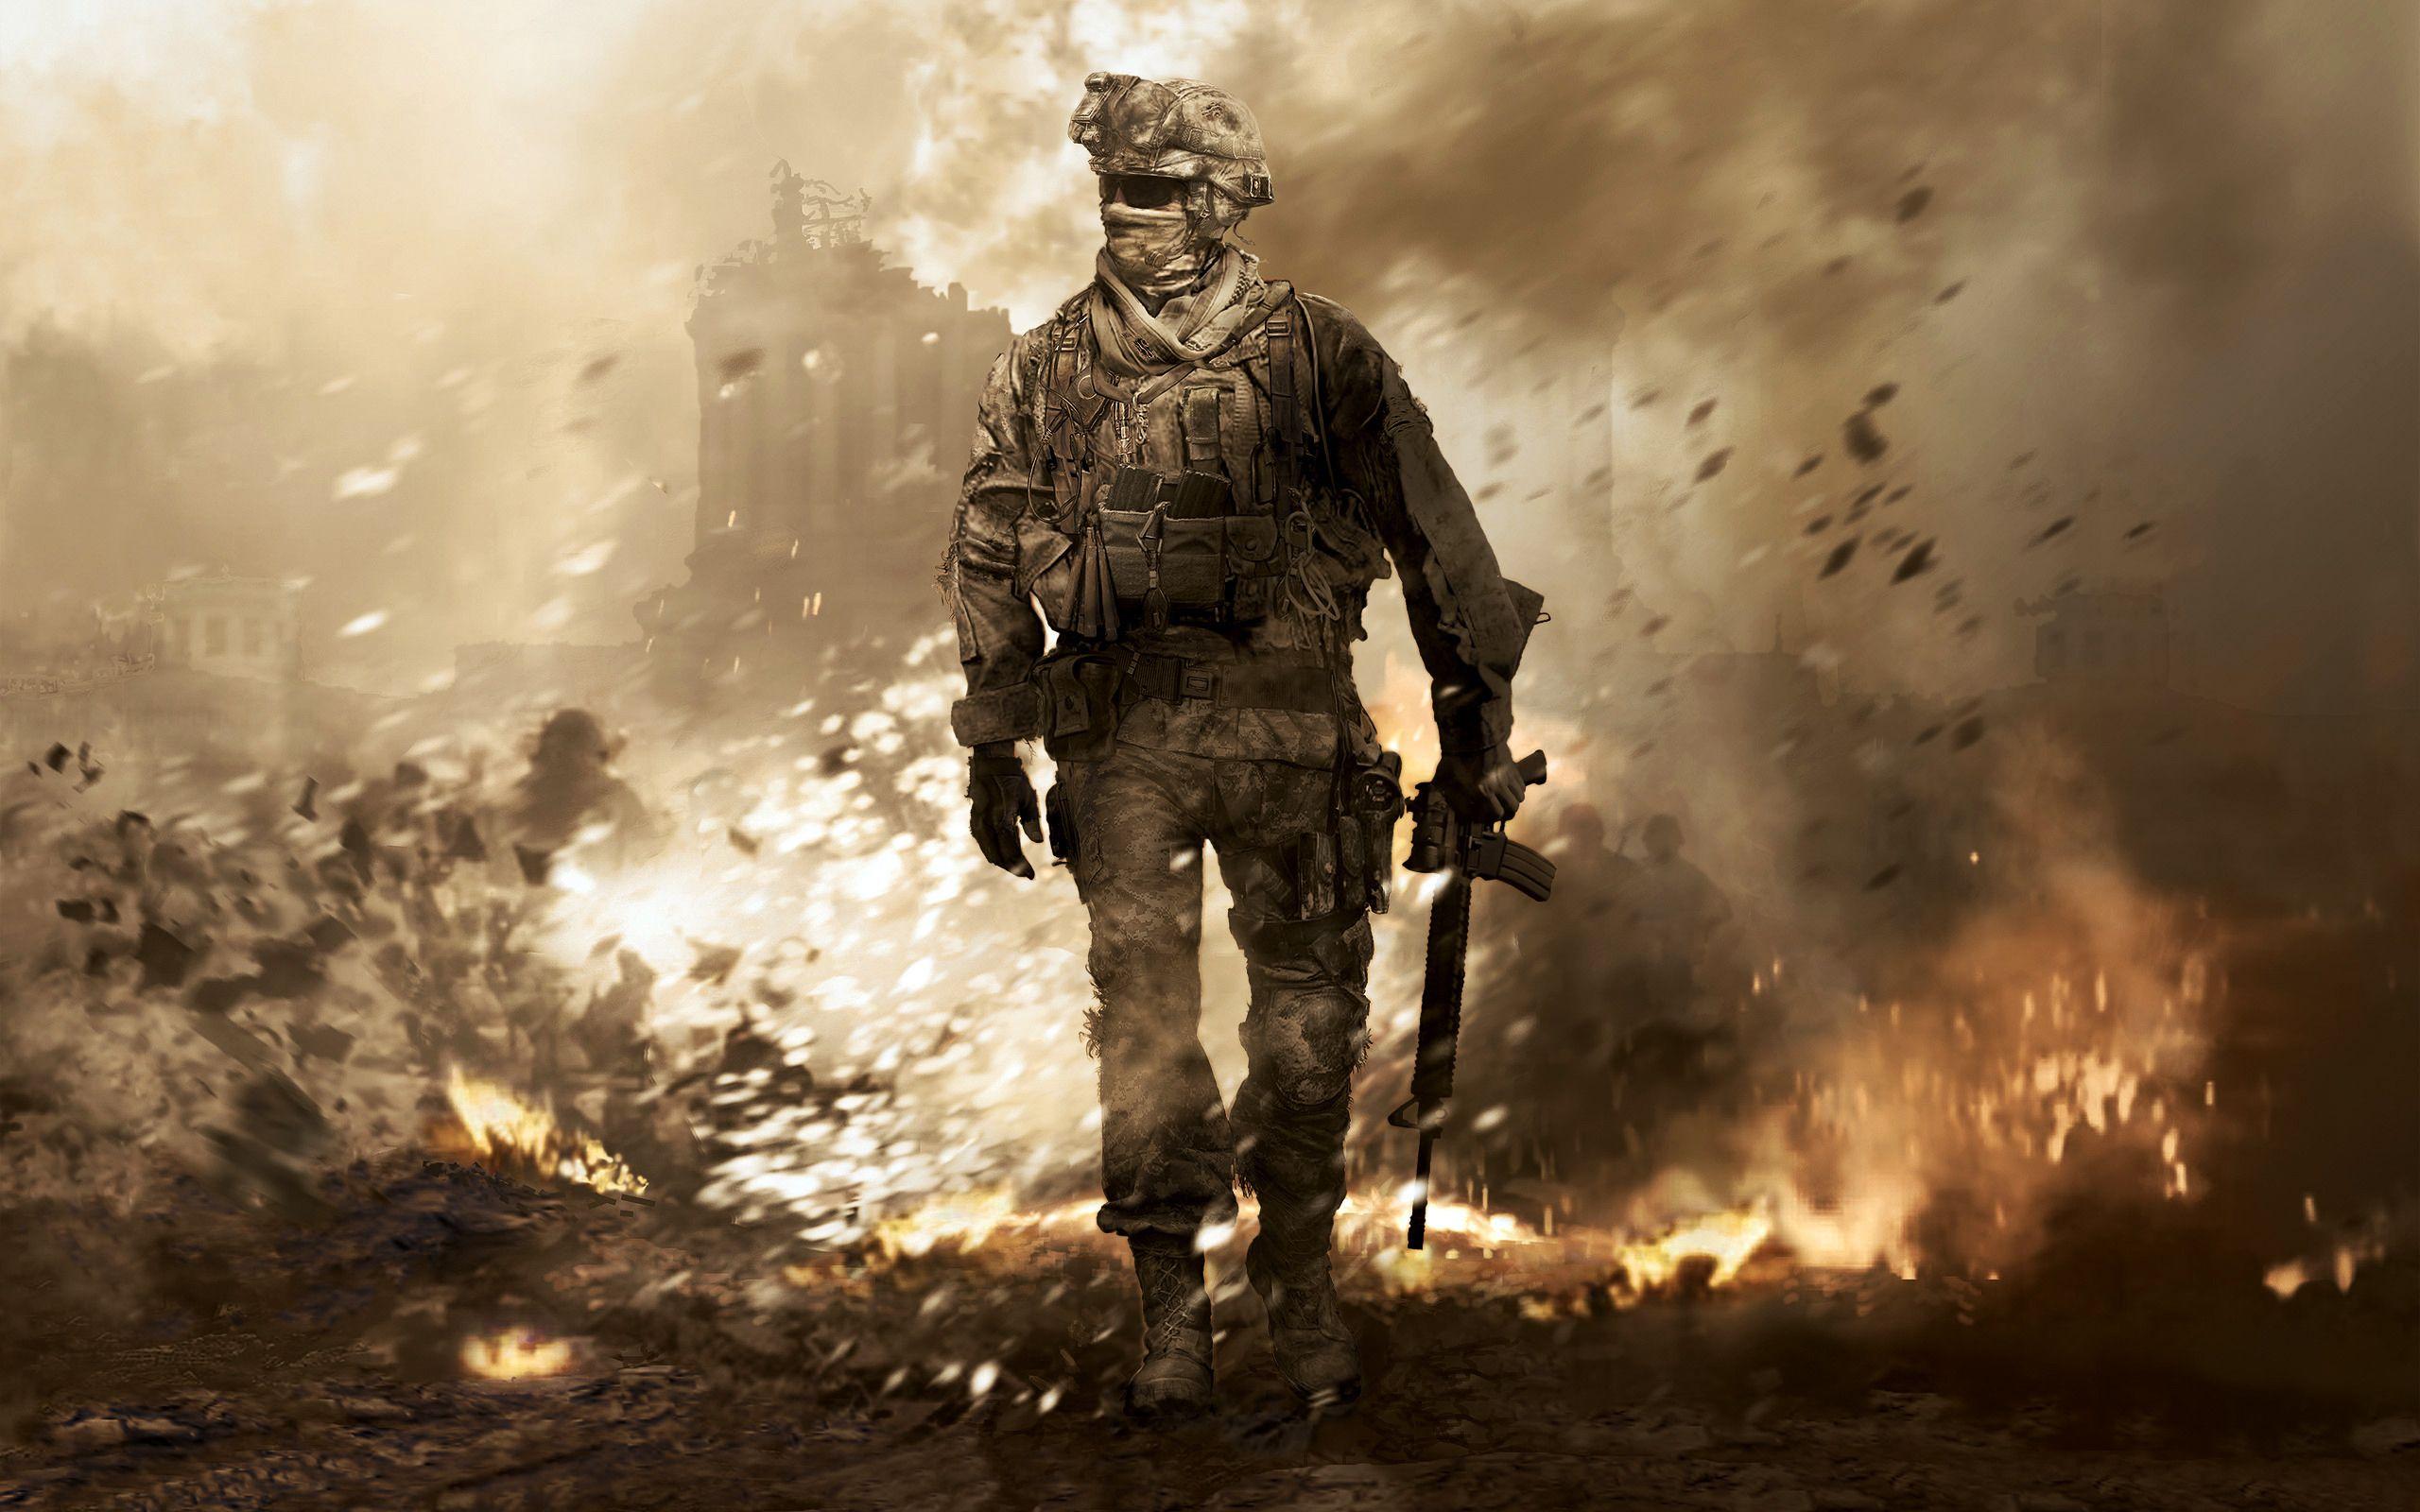 Cool Call of Duty Wallpapers - Top Free